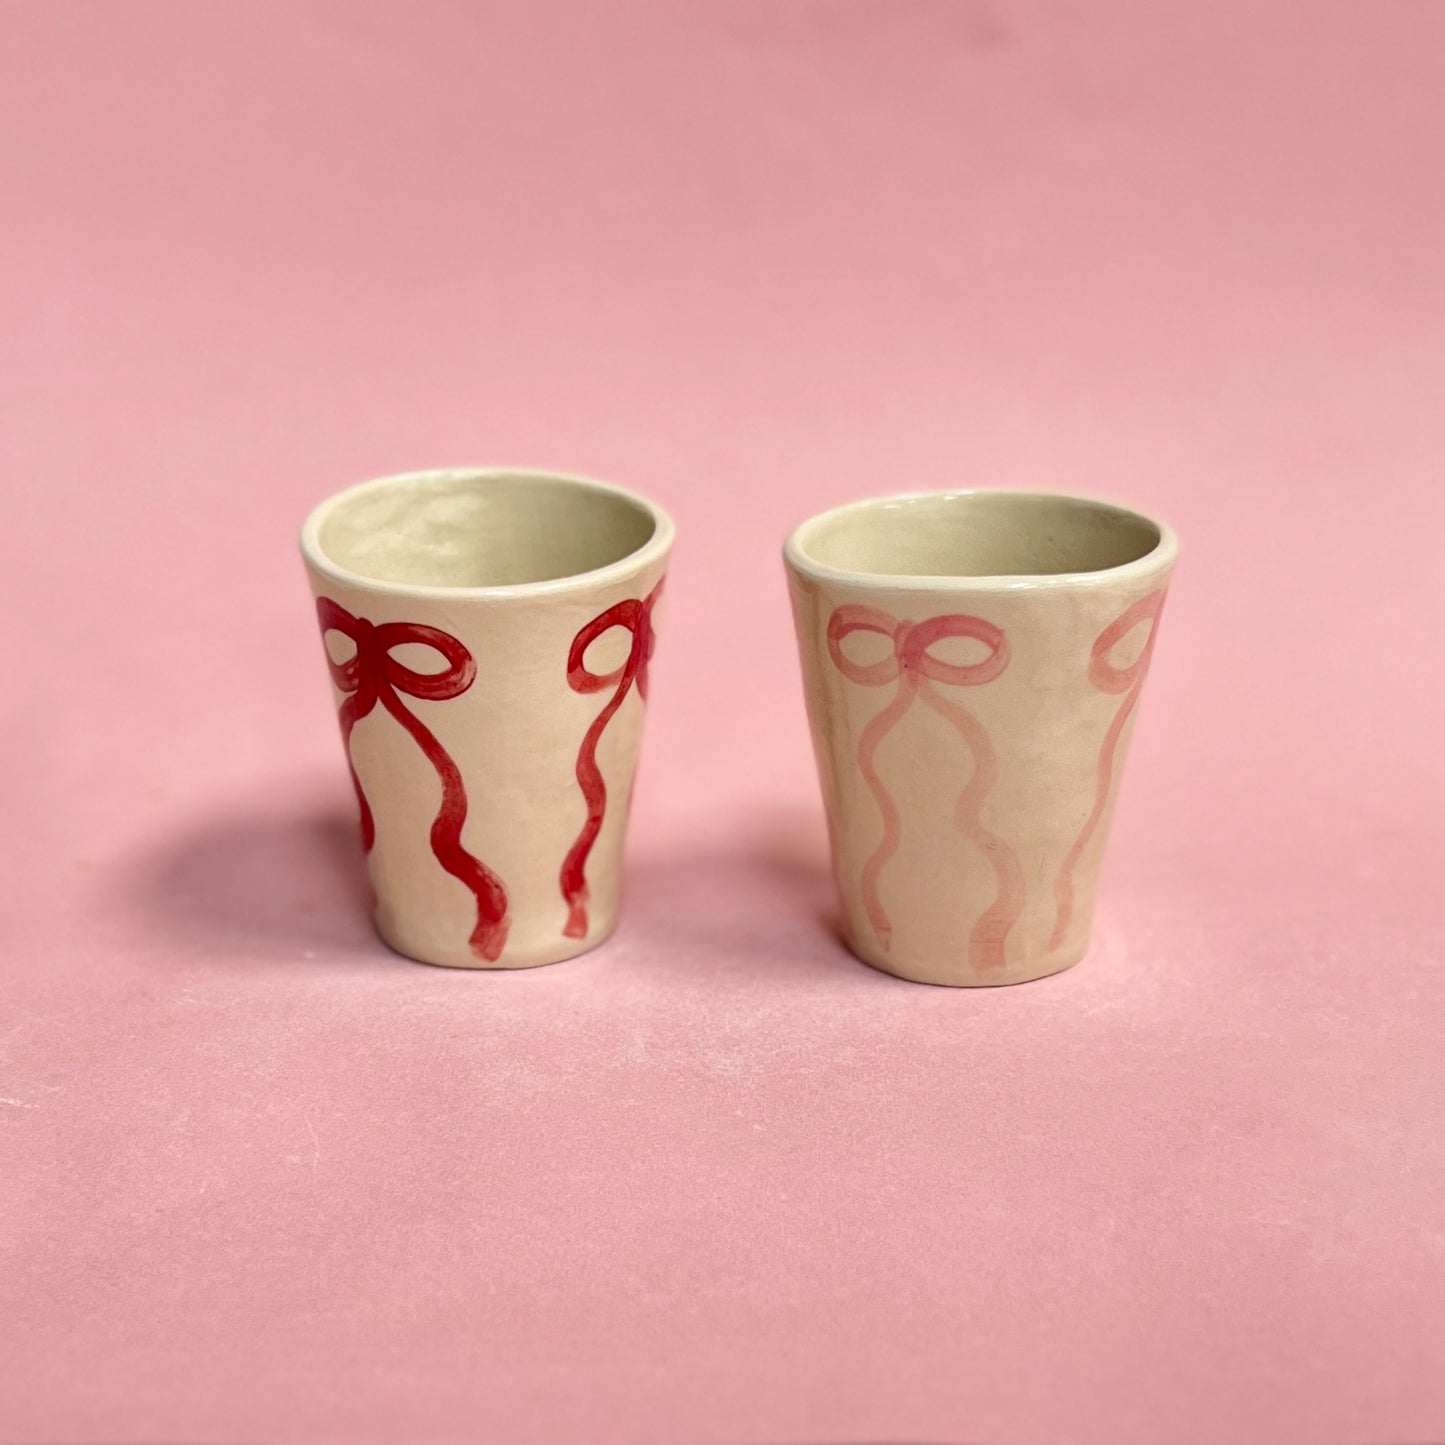 Bows on Bows on Bows Latte Cups